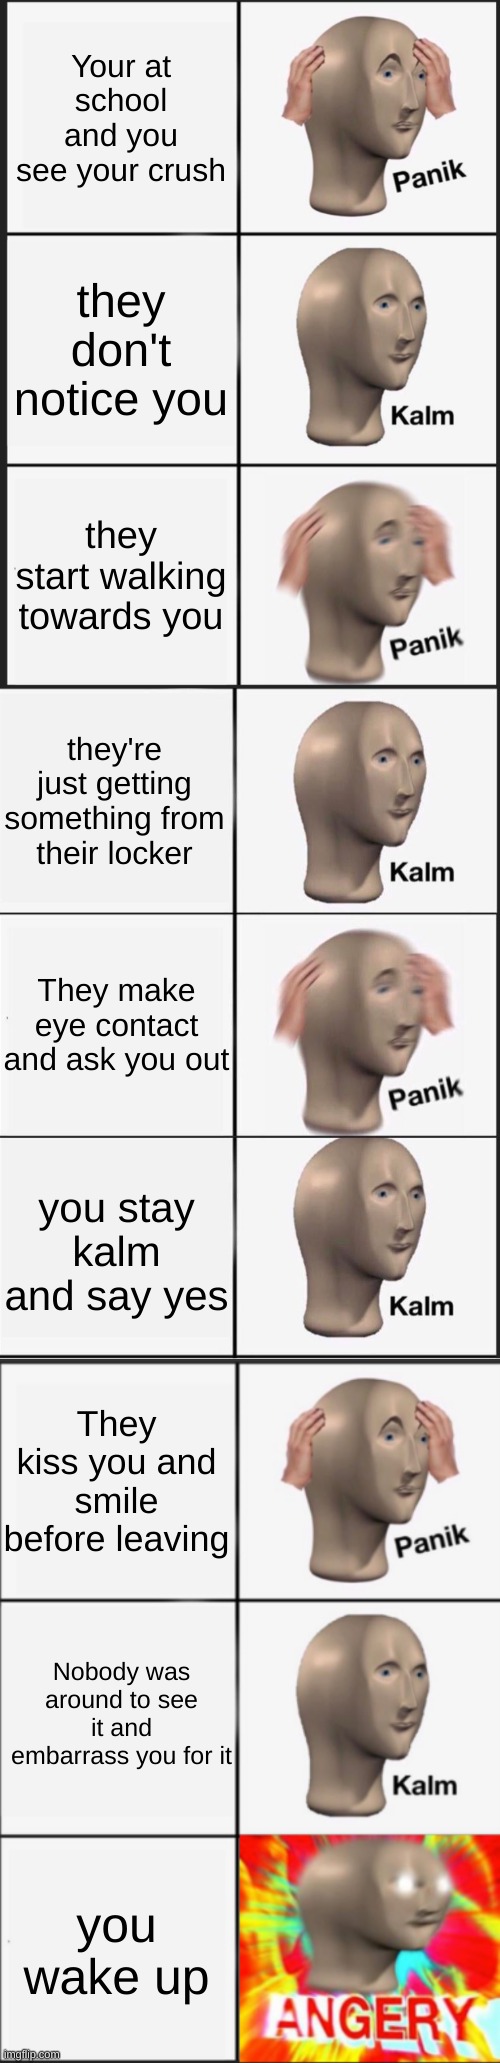 panik kalm panik kalm panik kalm panik kalm ANGERY | Your at school and you see your crush; they don't notice you; they start walking towards you; they're just getting something from their locker; They make eye contact and ask you out; you stay kalm and say yes; They kiss you and smile before leaving; Nobody was around to see it and embarrass you for it; you wake up | image tagged in memes,panik kalm panik,reverse kalm panik,panik kalm angery | made w/ Imgflip meme maker